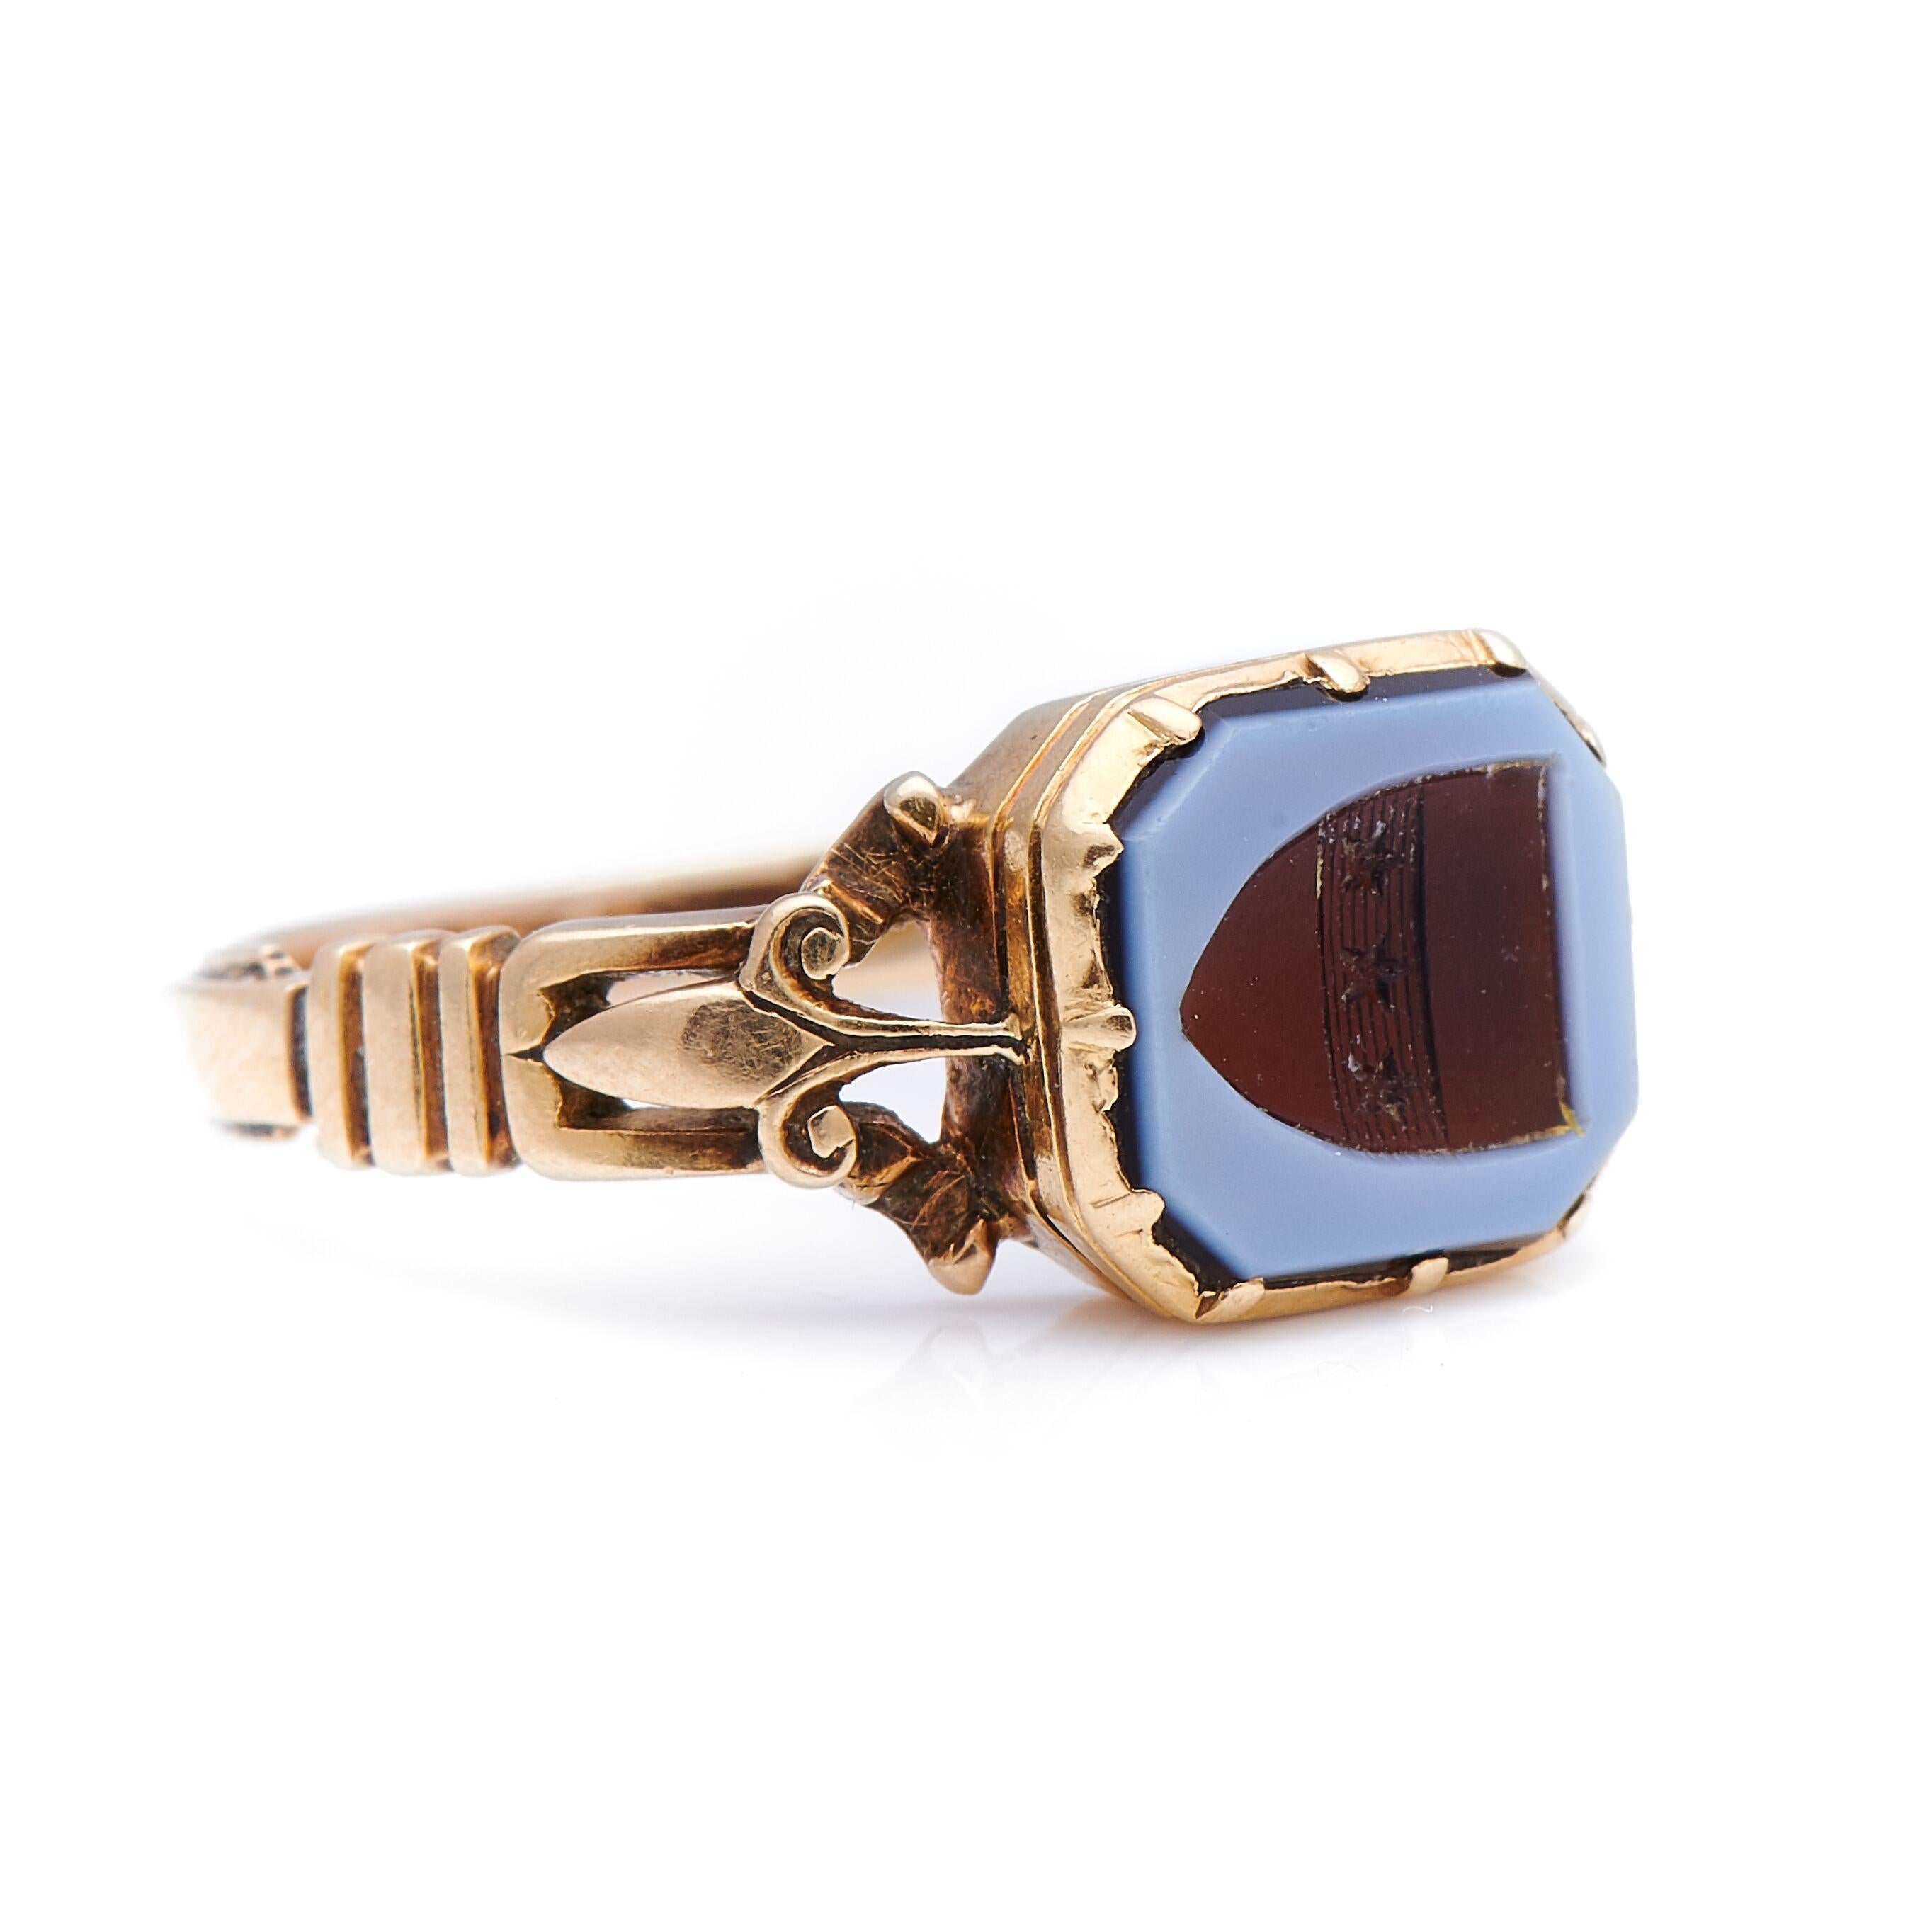 Carved agate signet ring, circa 1880. A striking ring, a beautiful carved agate, depicting a family crest, sits to centre in a simple but visually stimulating ribbed rub-over setting with skilful Fleur-de-lis style gold work shoulders; a true